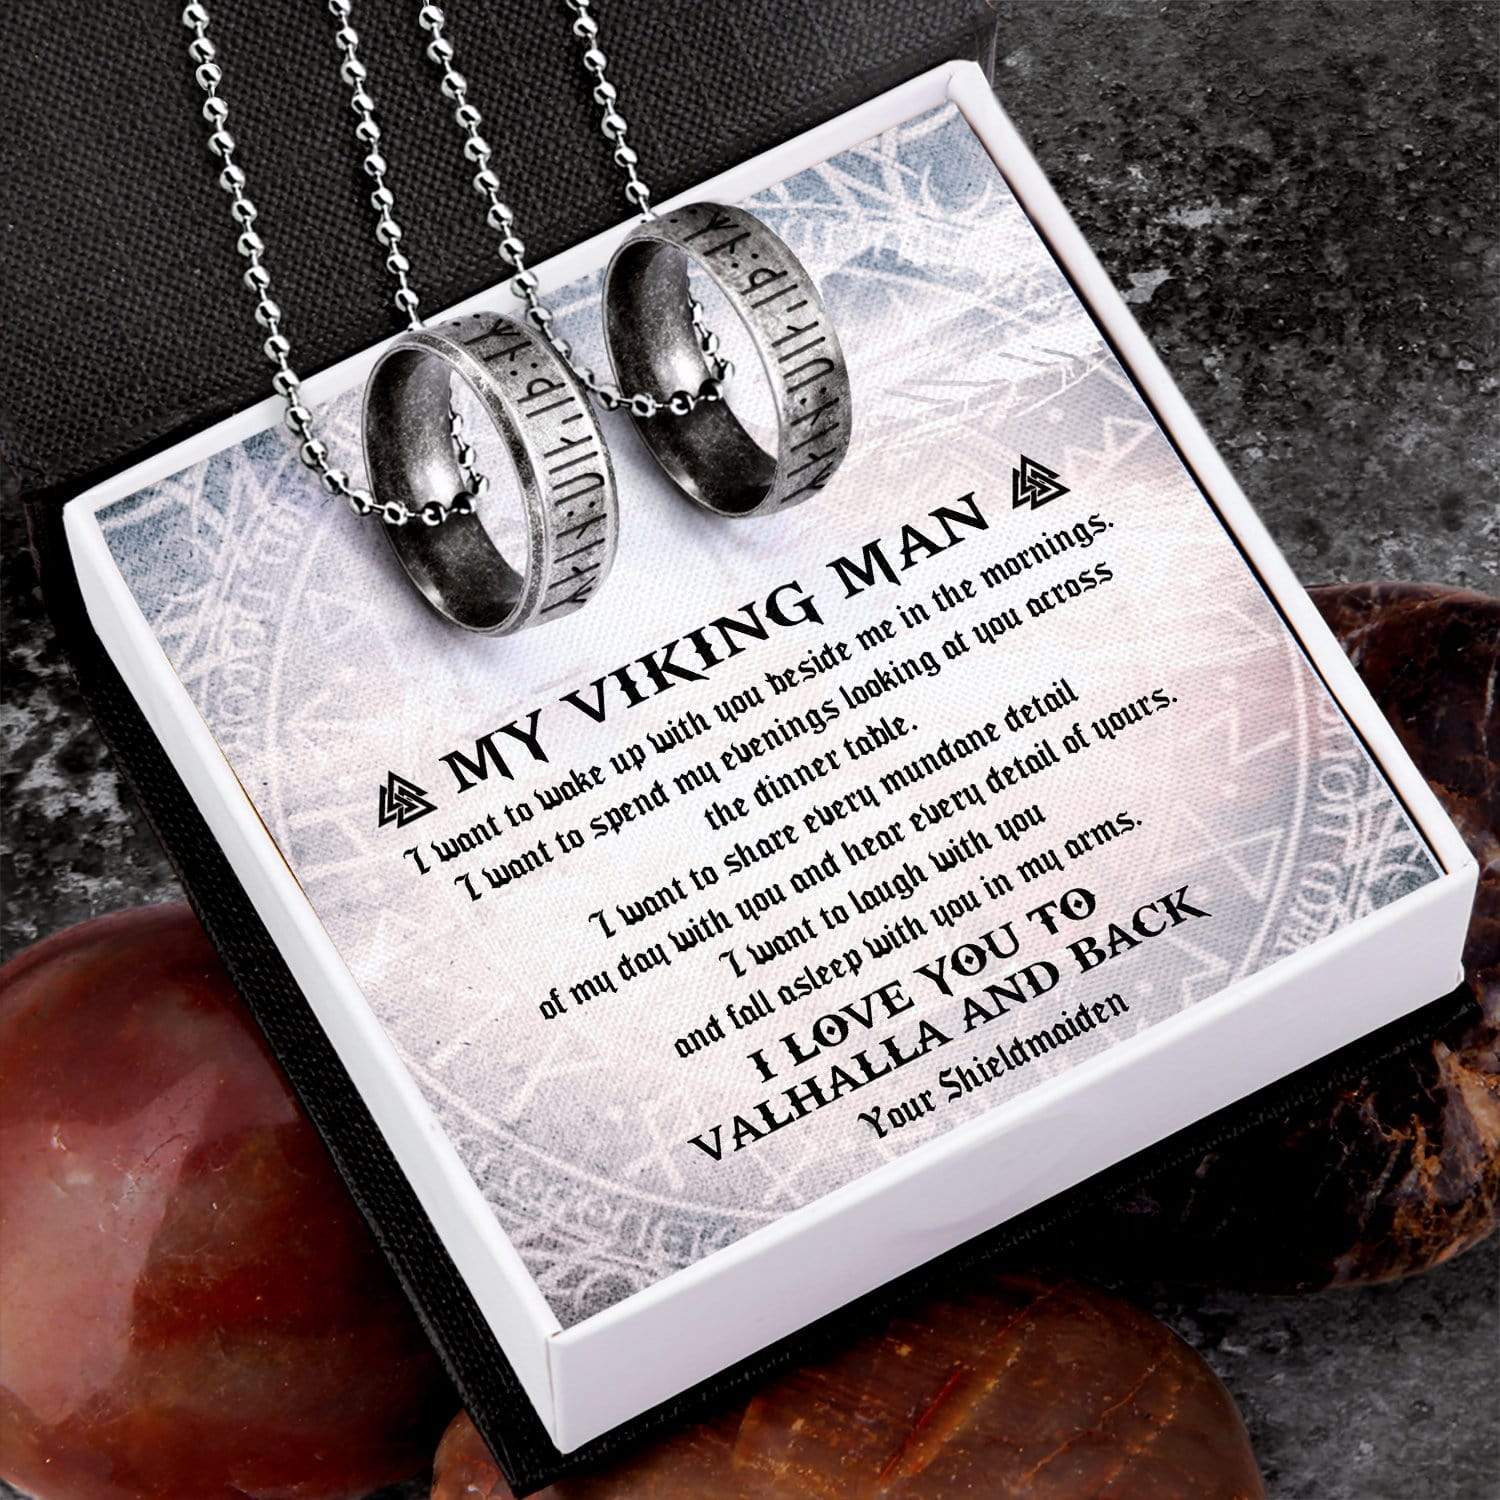 Couple Rune Ring Necklaces - My Viking Man - I Love You To Valhalla And Back - Gndx26002